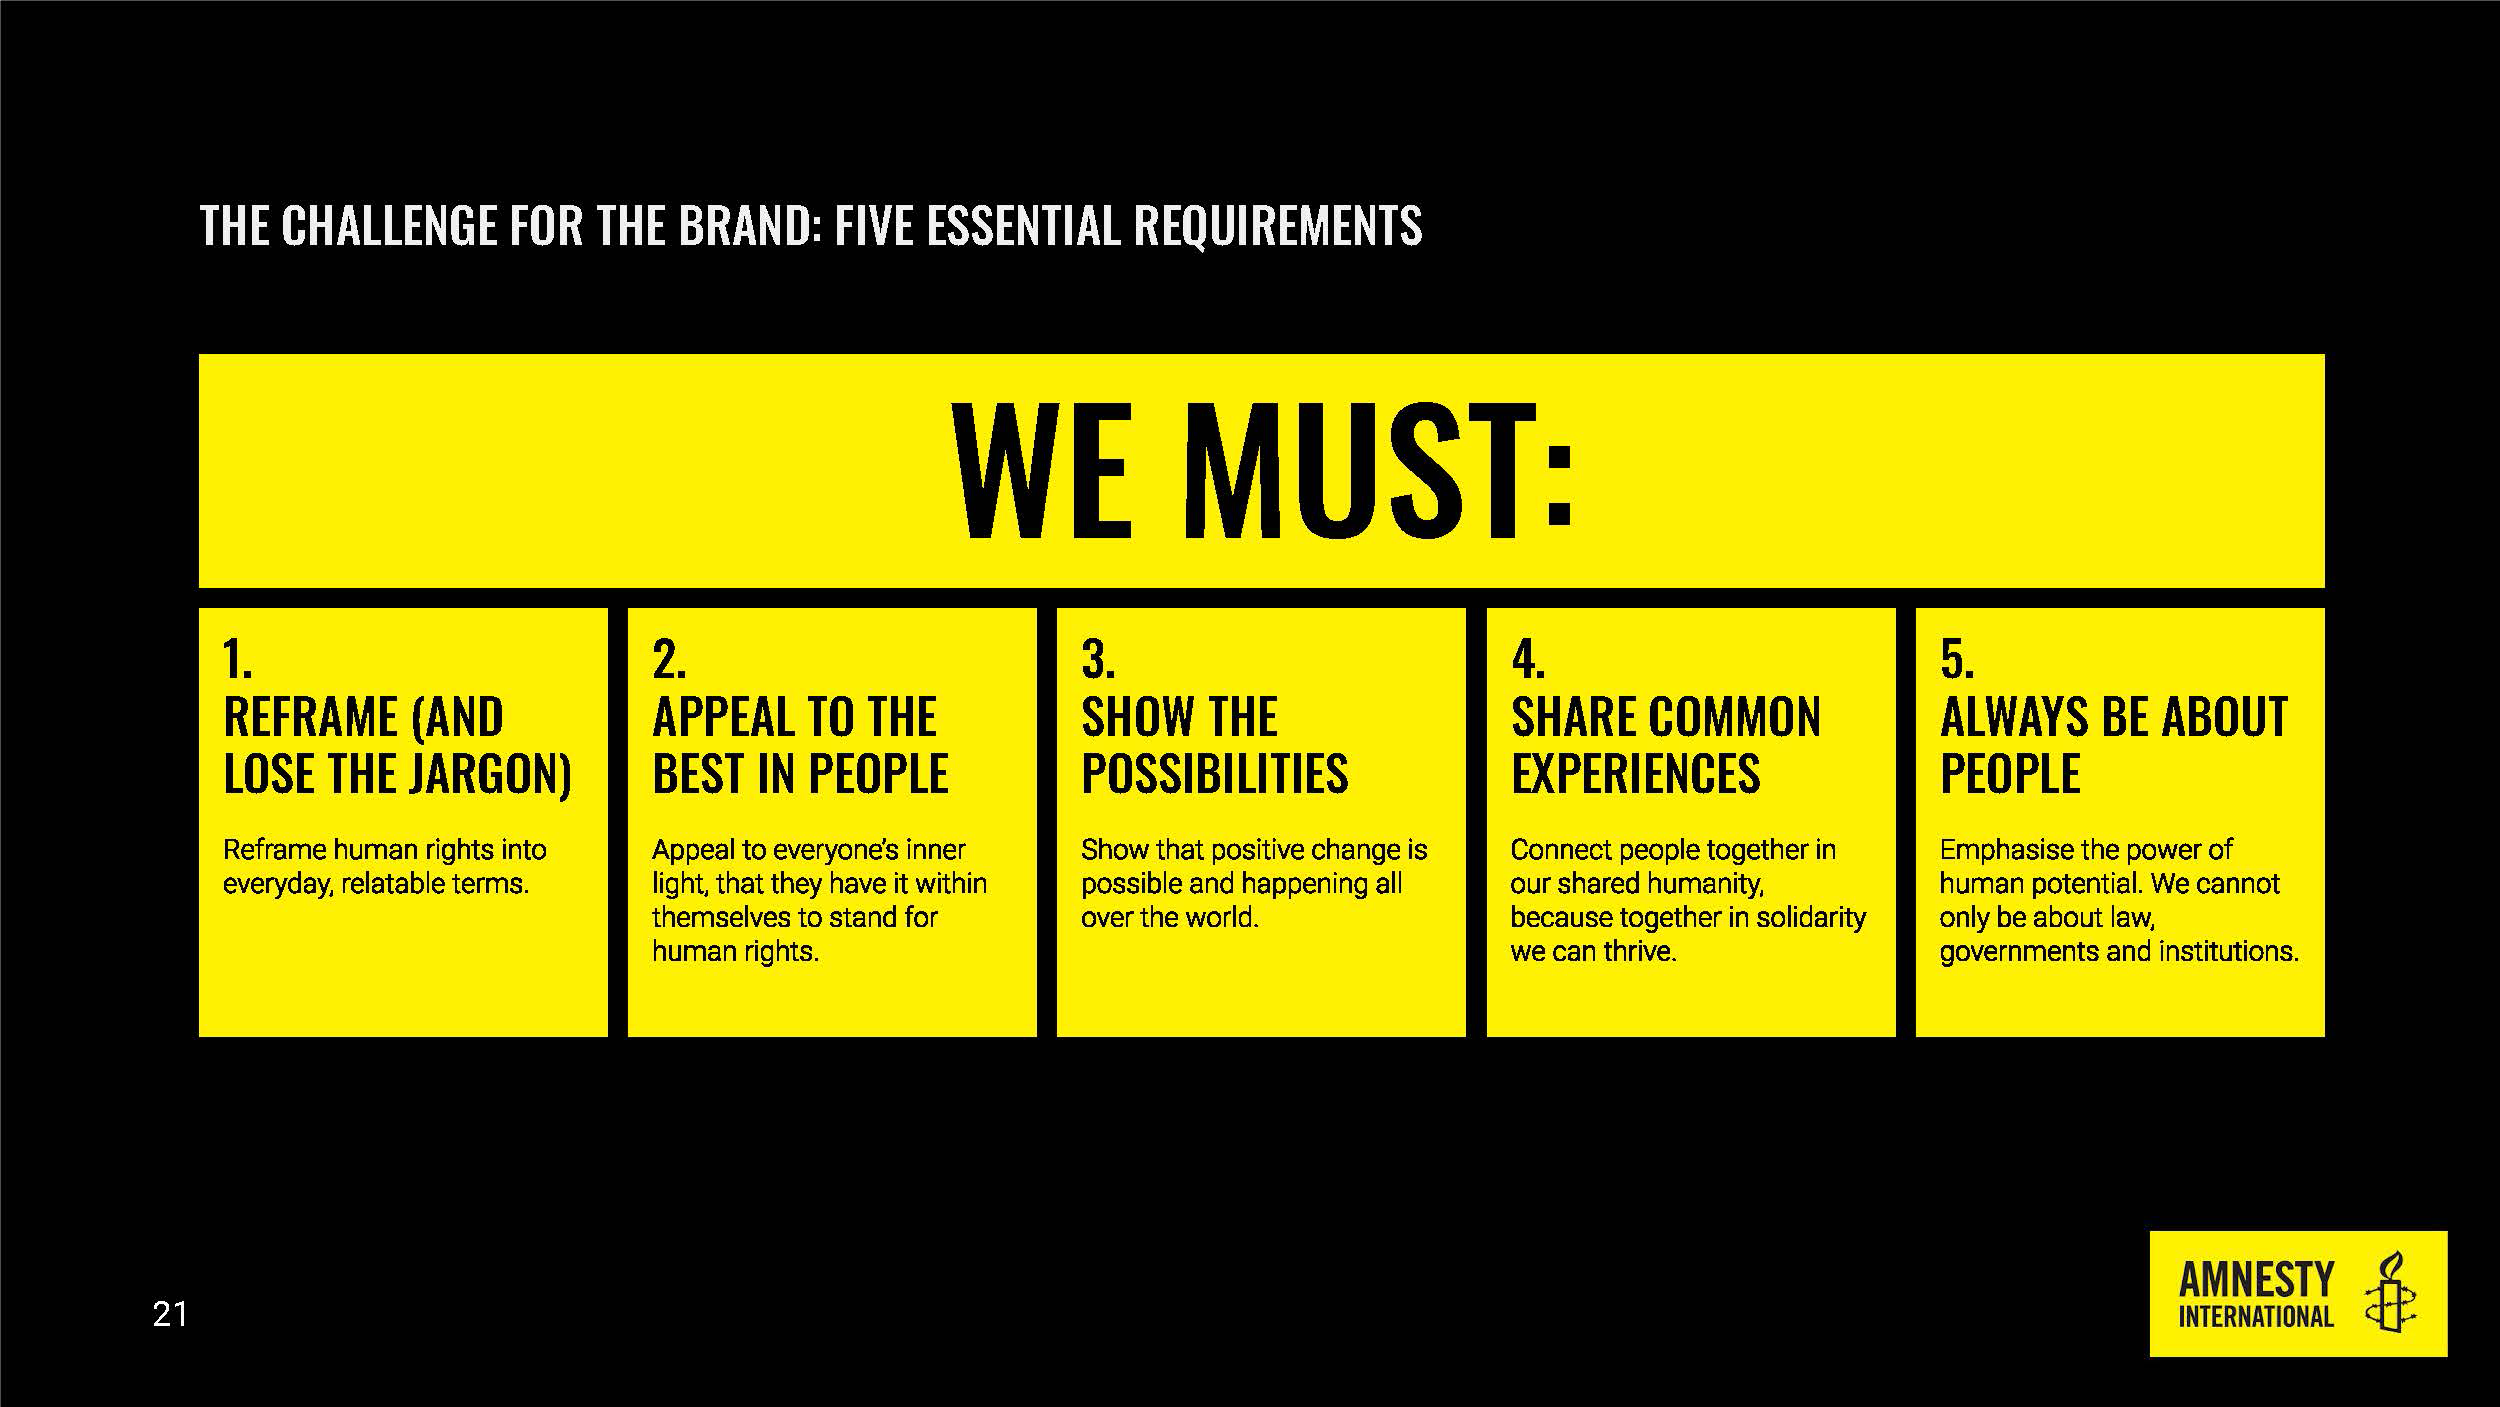 The Challenge for the brand: Five essential requirements chart